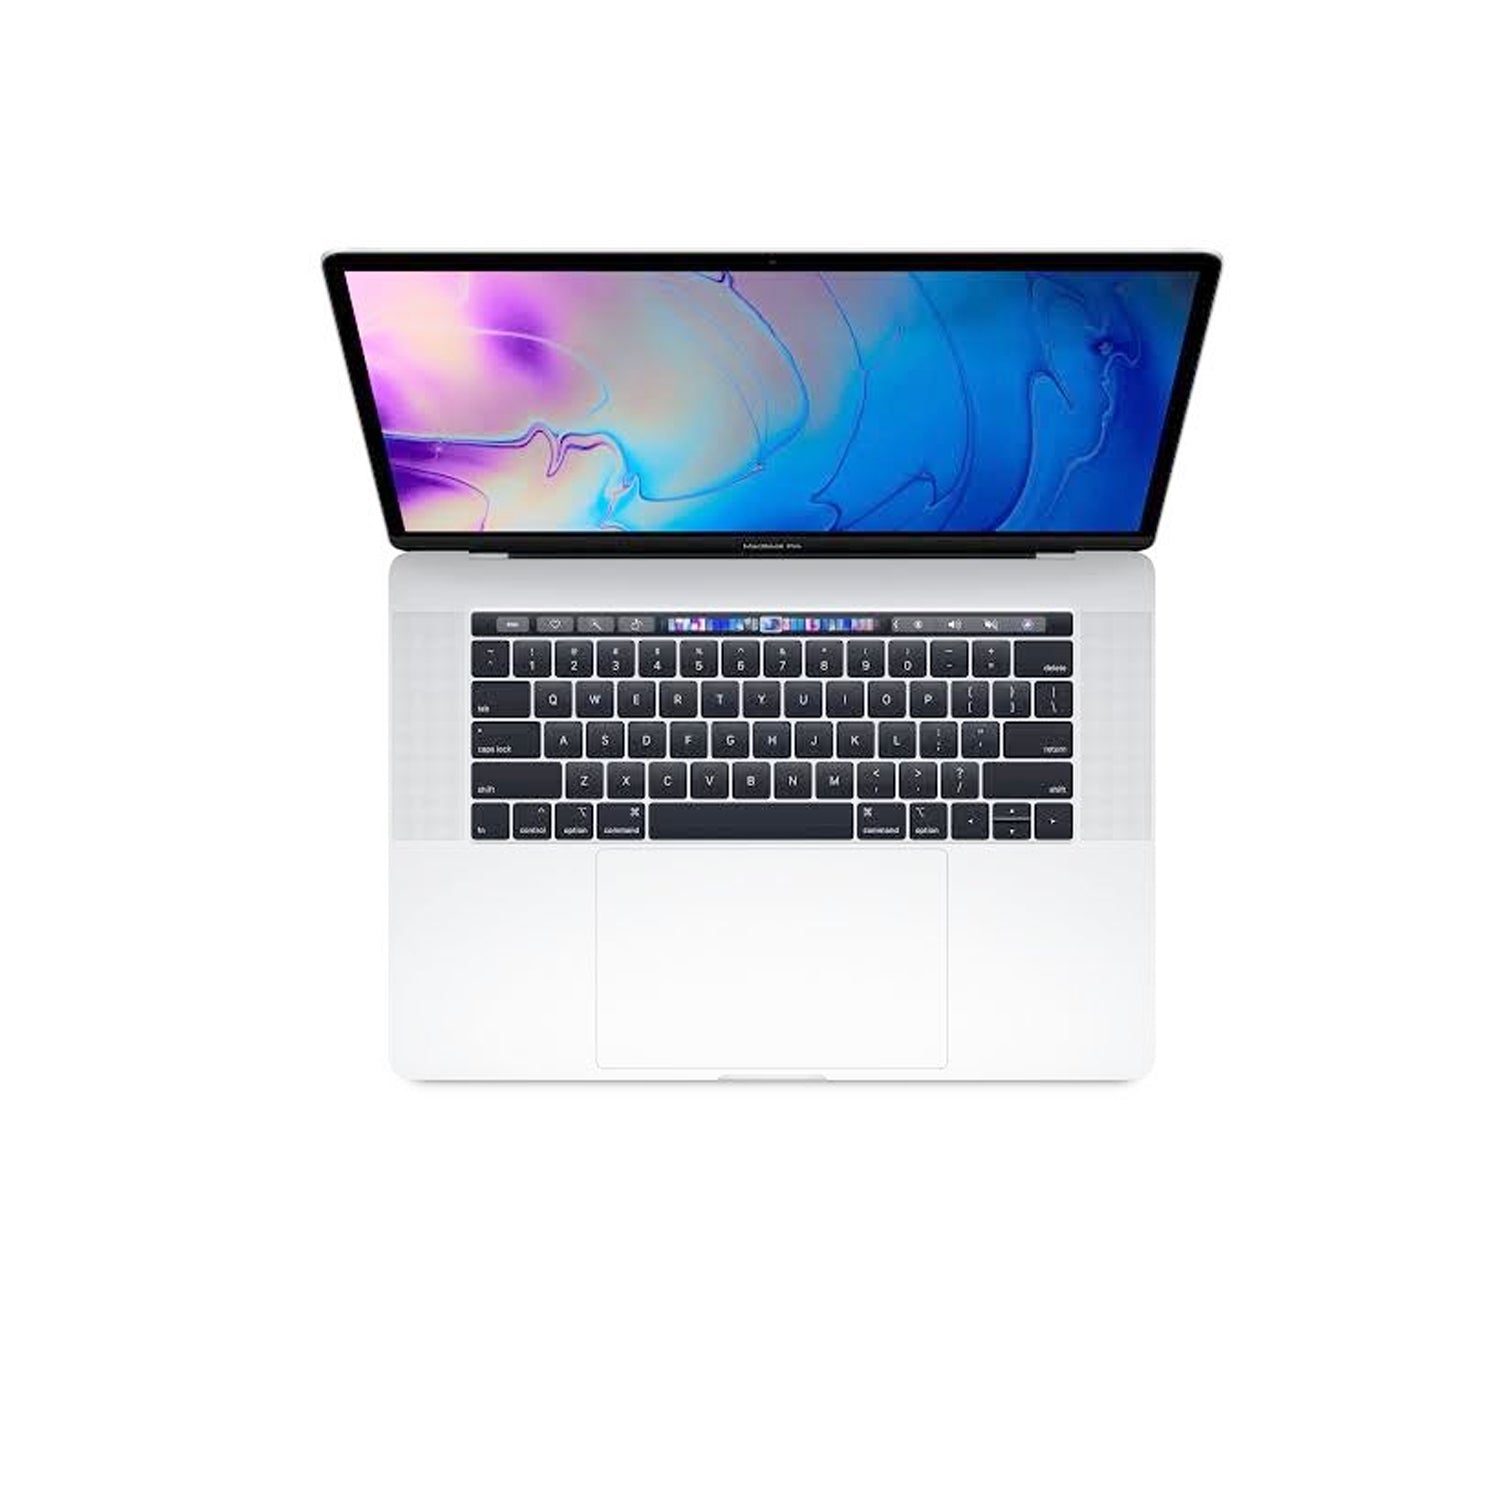 Apple MacBook Pro 15-inch with Touch Bar 256GB - Silver (Spanish Keyboard) MR962E/A with Apple AirPods Pro